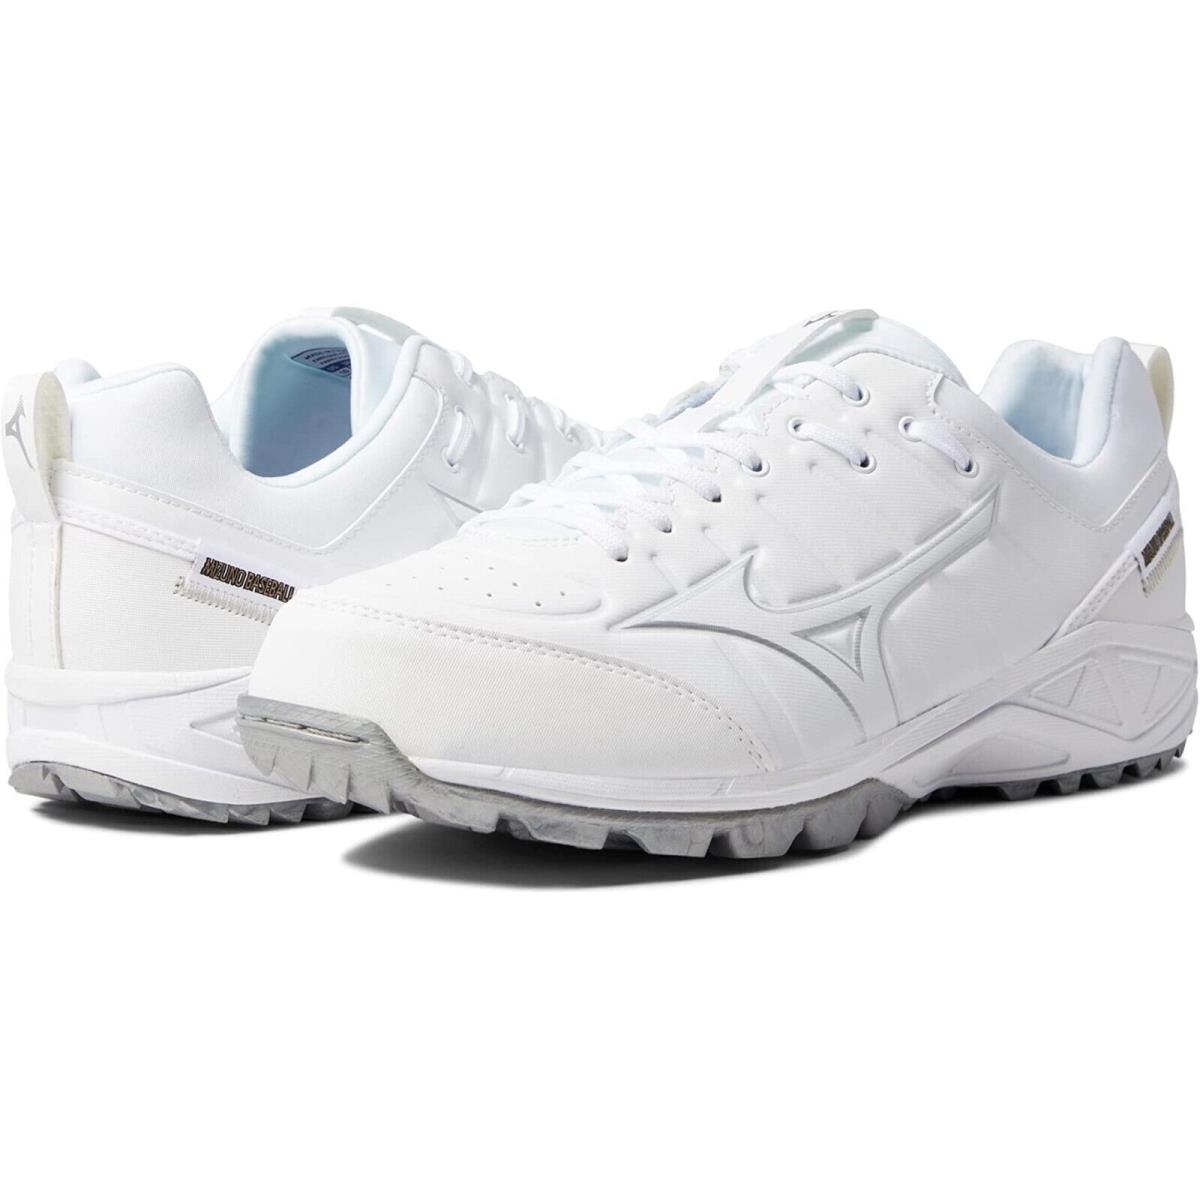 Mizuno N7601 Ambition 2 All Surface Low Turf Shoes Womens Sneakers White Size 11